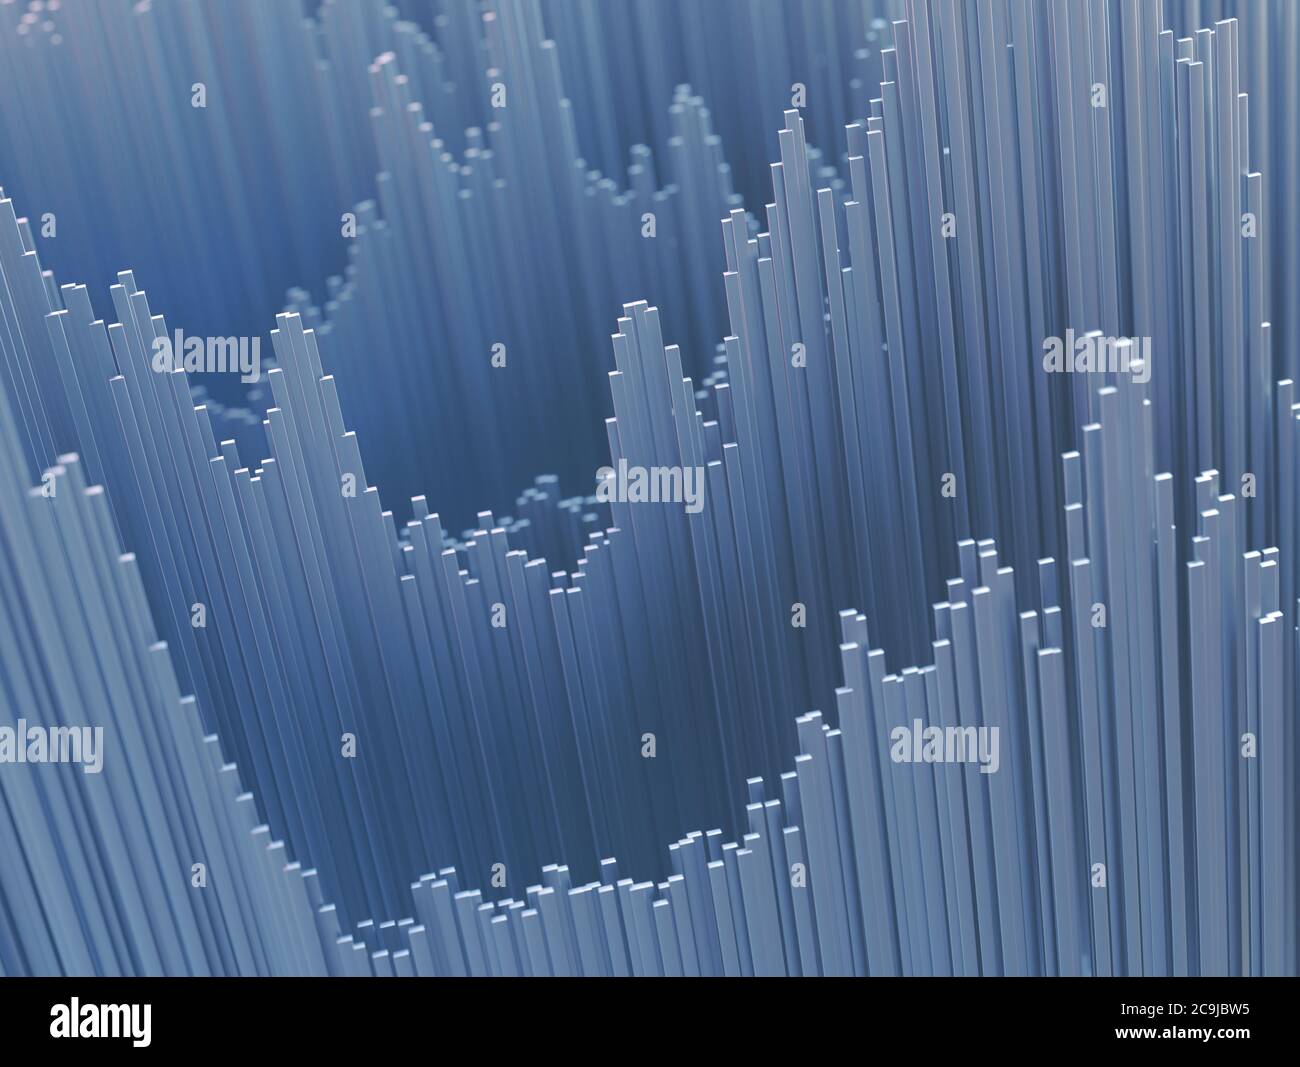 Structural abstract background, illustration. Stock Photo